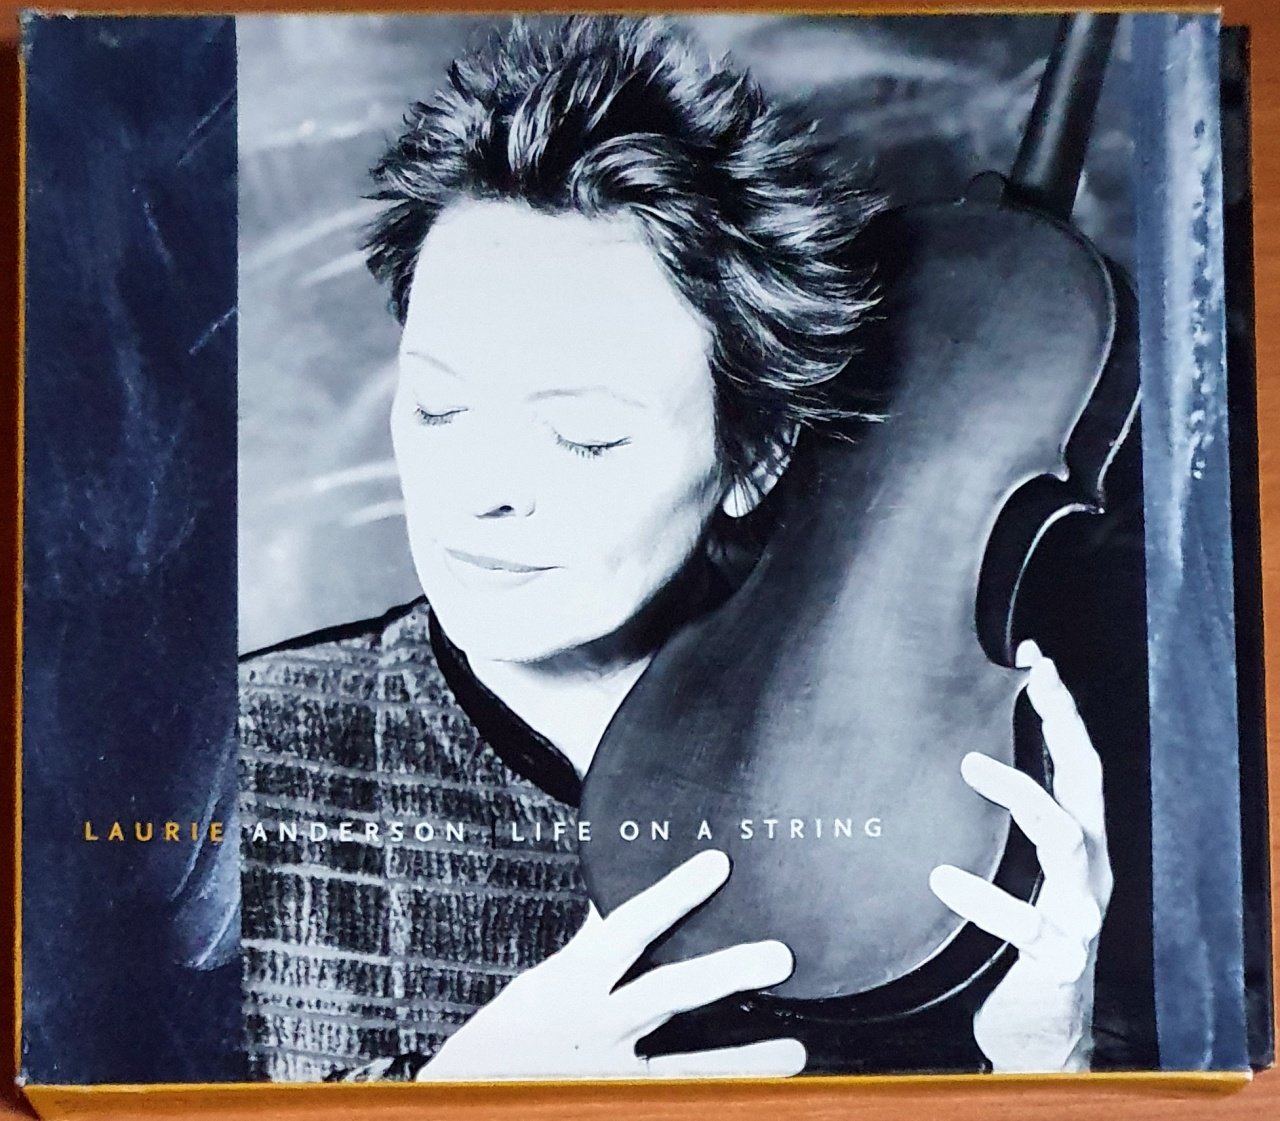 LAURIE ANDERSON - LIFE ON A STRING (2001) - HDCD 2.EL